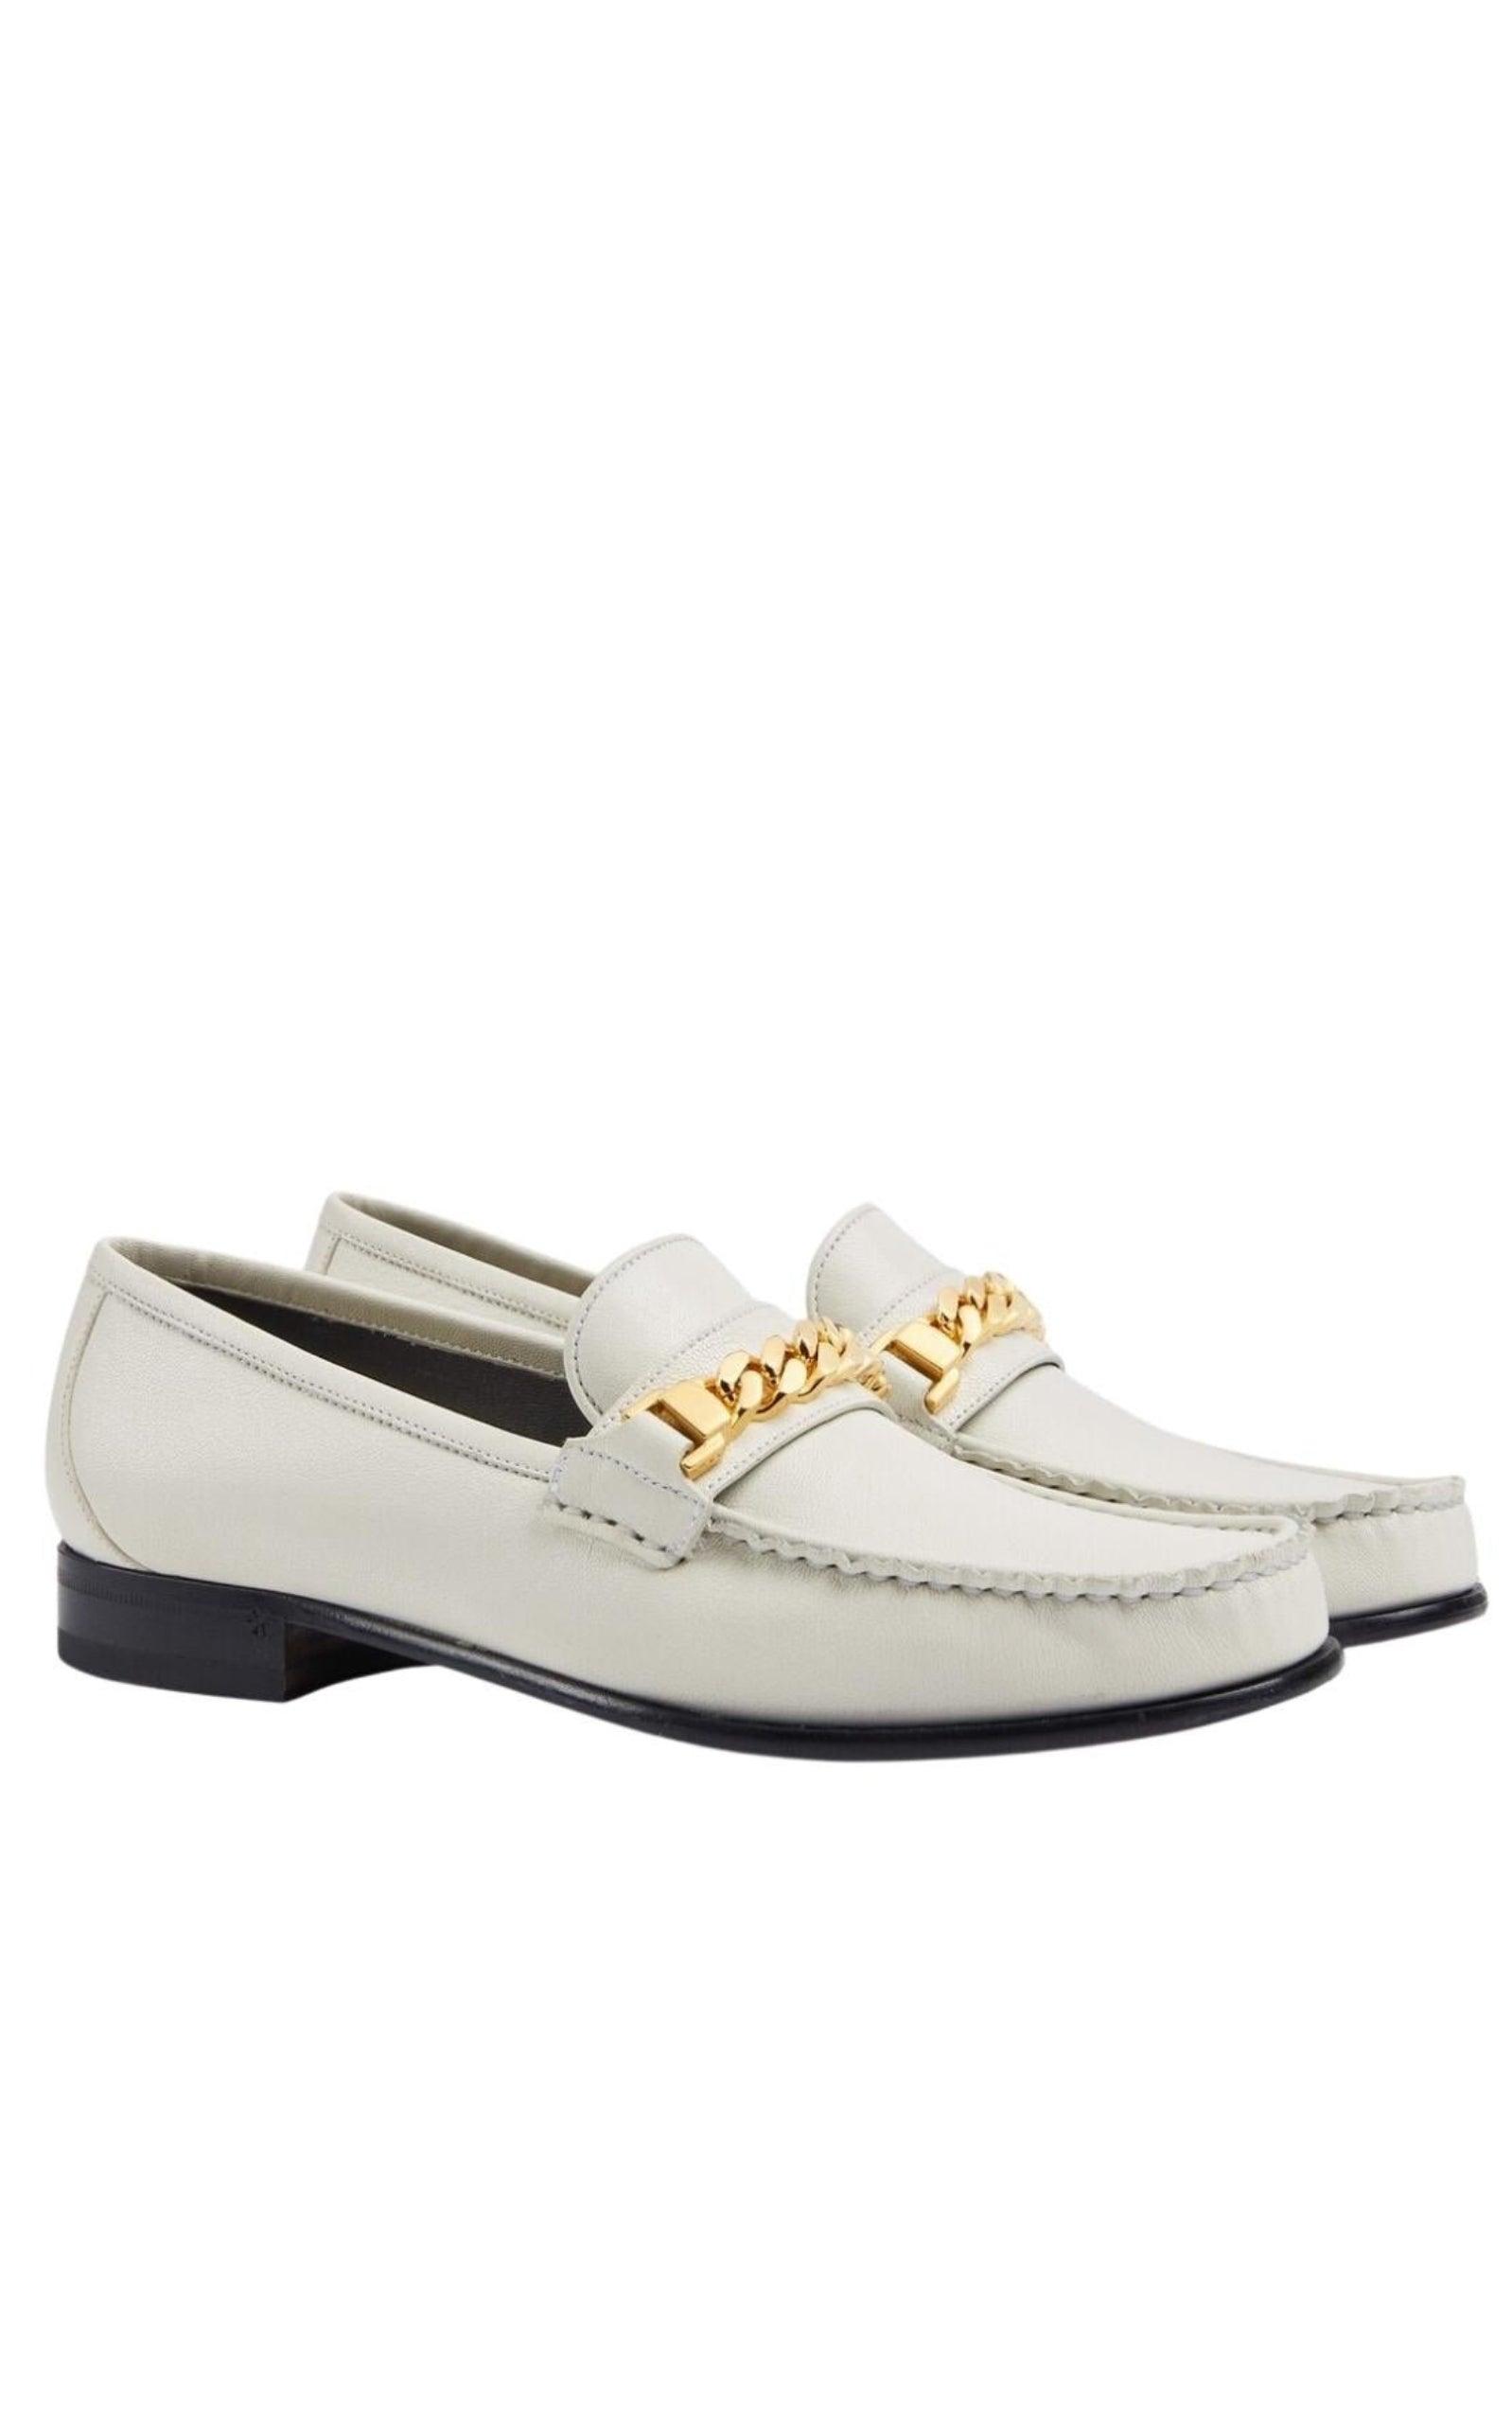  GucciOff-White Curb Chain Loafers - Runway Catalog